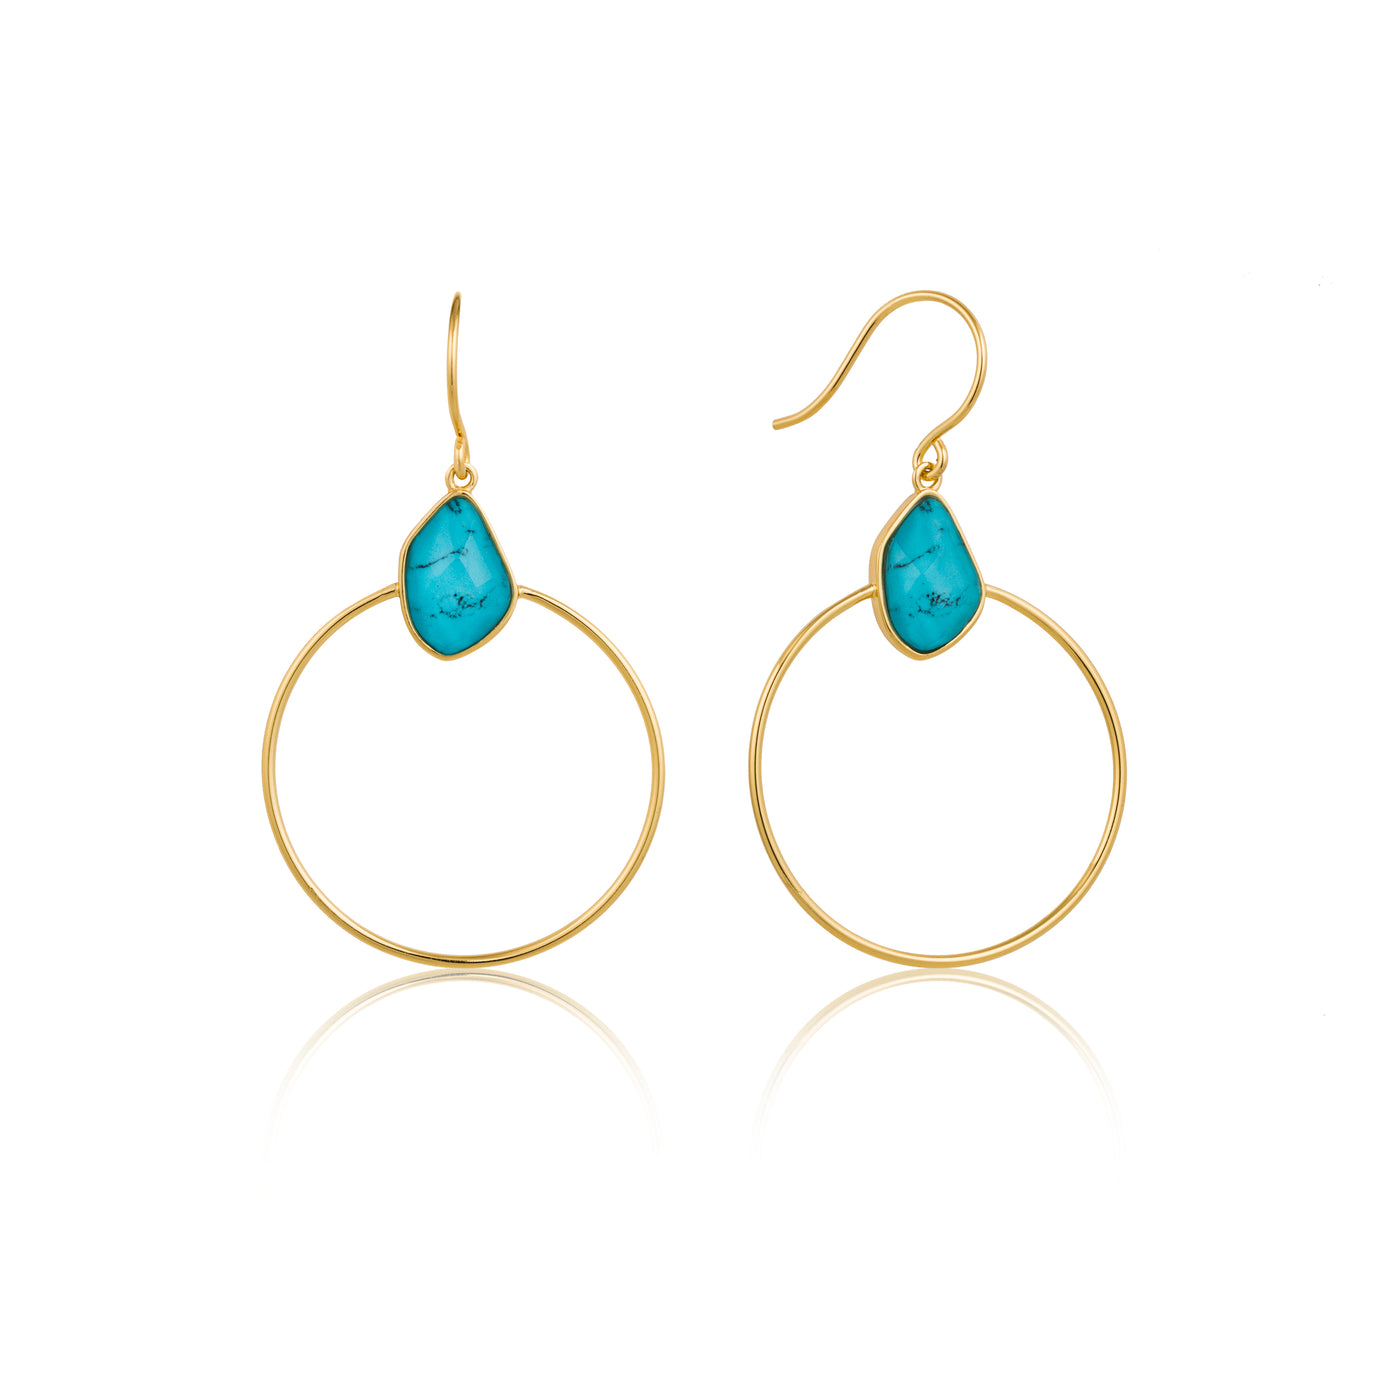 Ania Haie Turquoise Front Hoop Gold Plated Earrings E014-02G